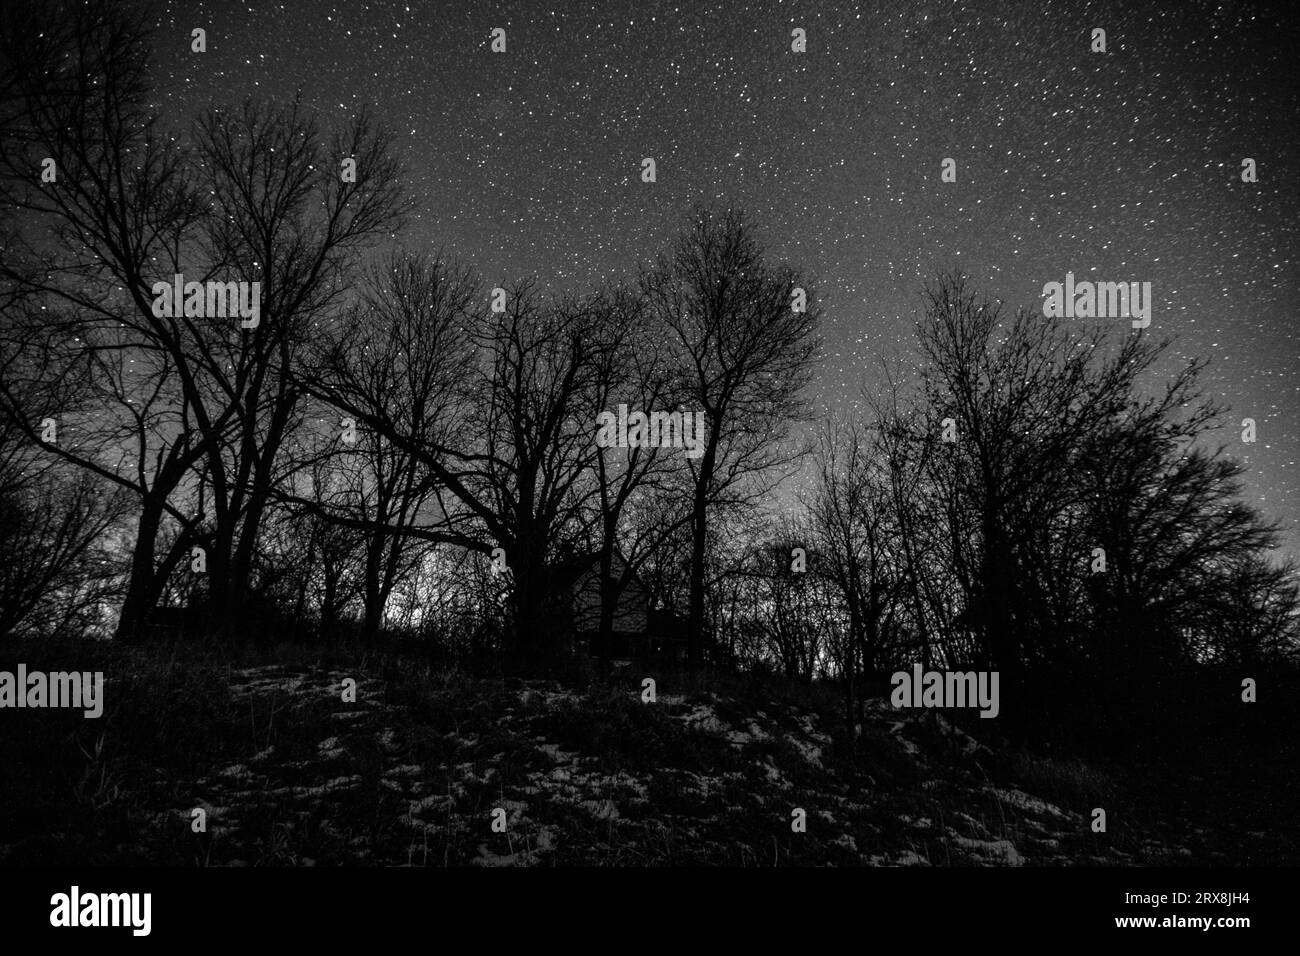 Haunted house hidden in a copse of trees under a star filled sky rendered in shimmering monochromatic black and white. Stock Photo